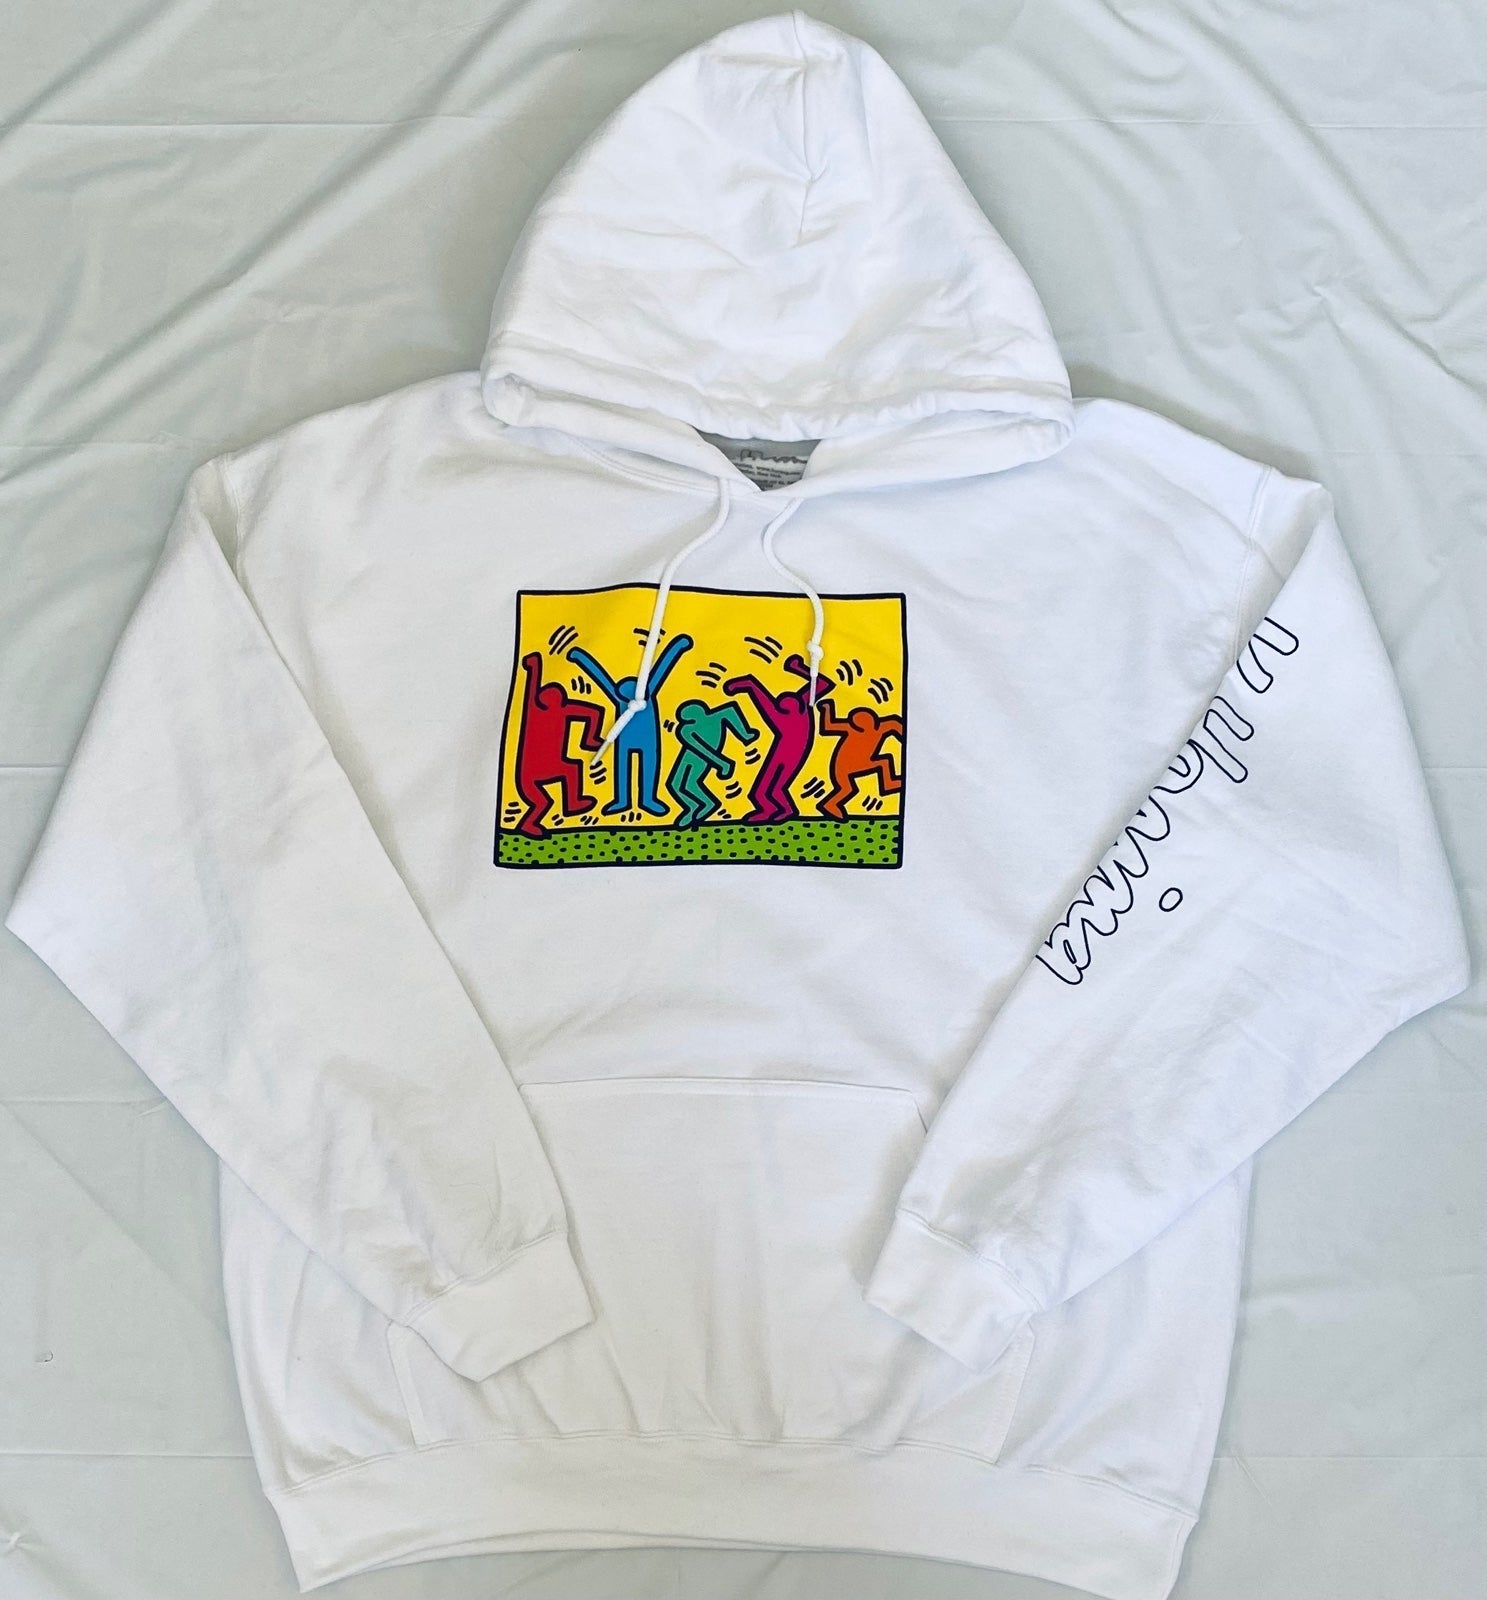 Street Art Wardrobe: Keith Haring Hoodies for Every Occasion